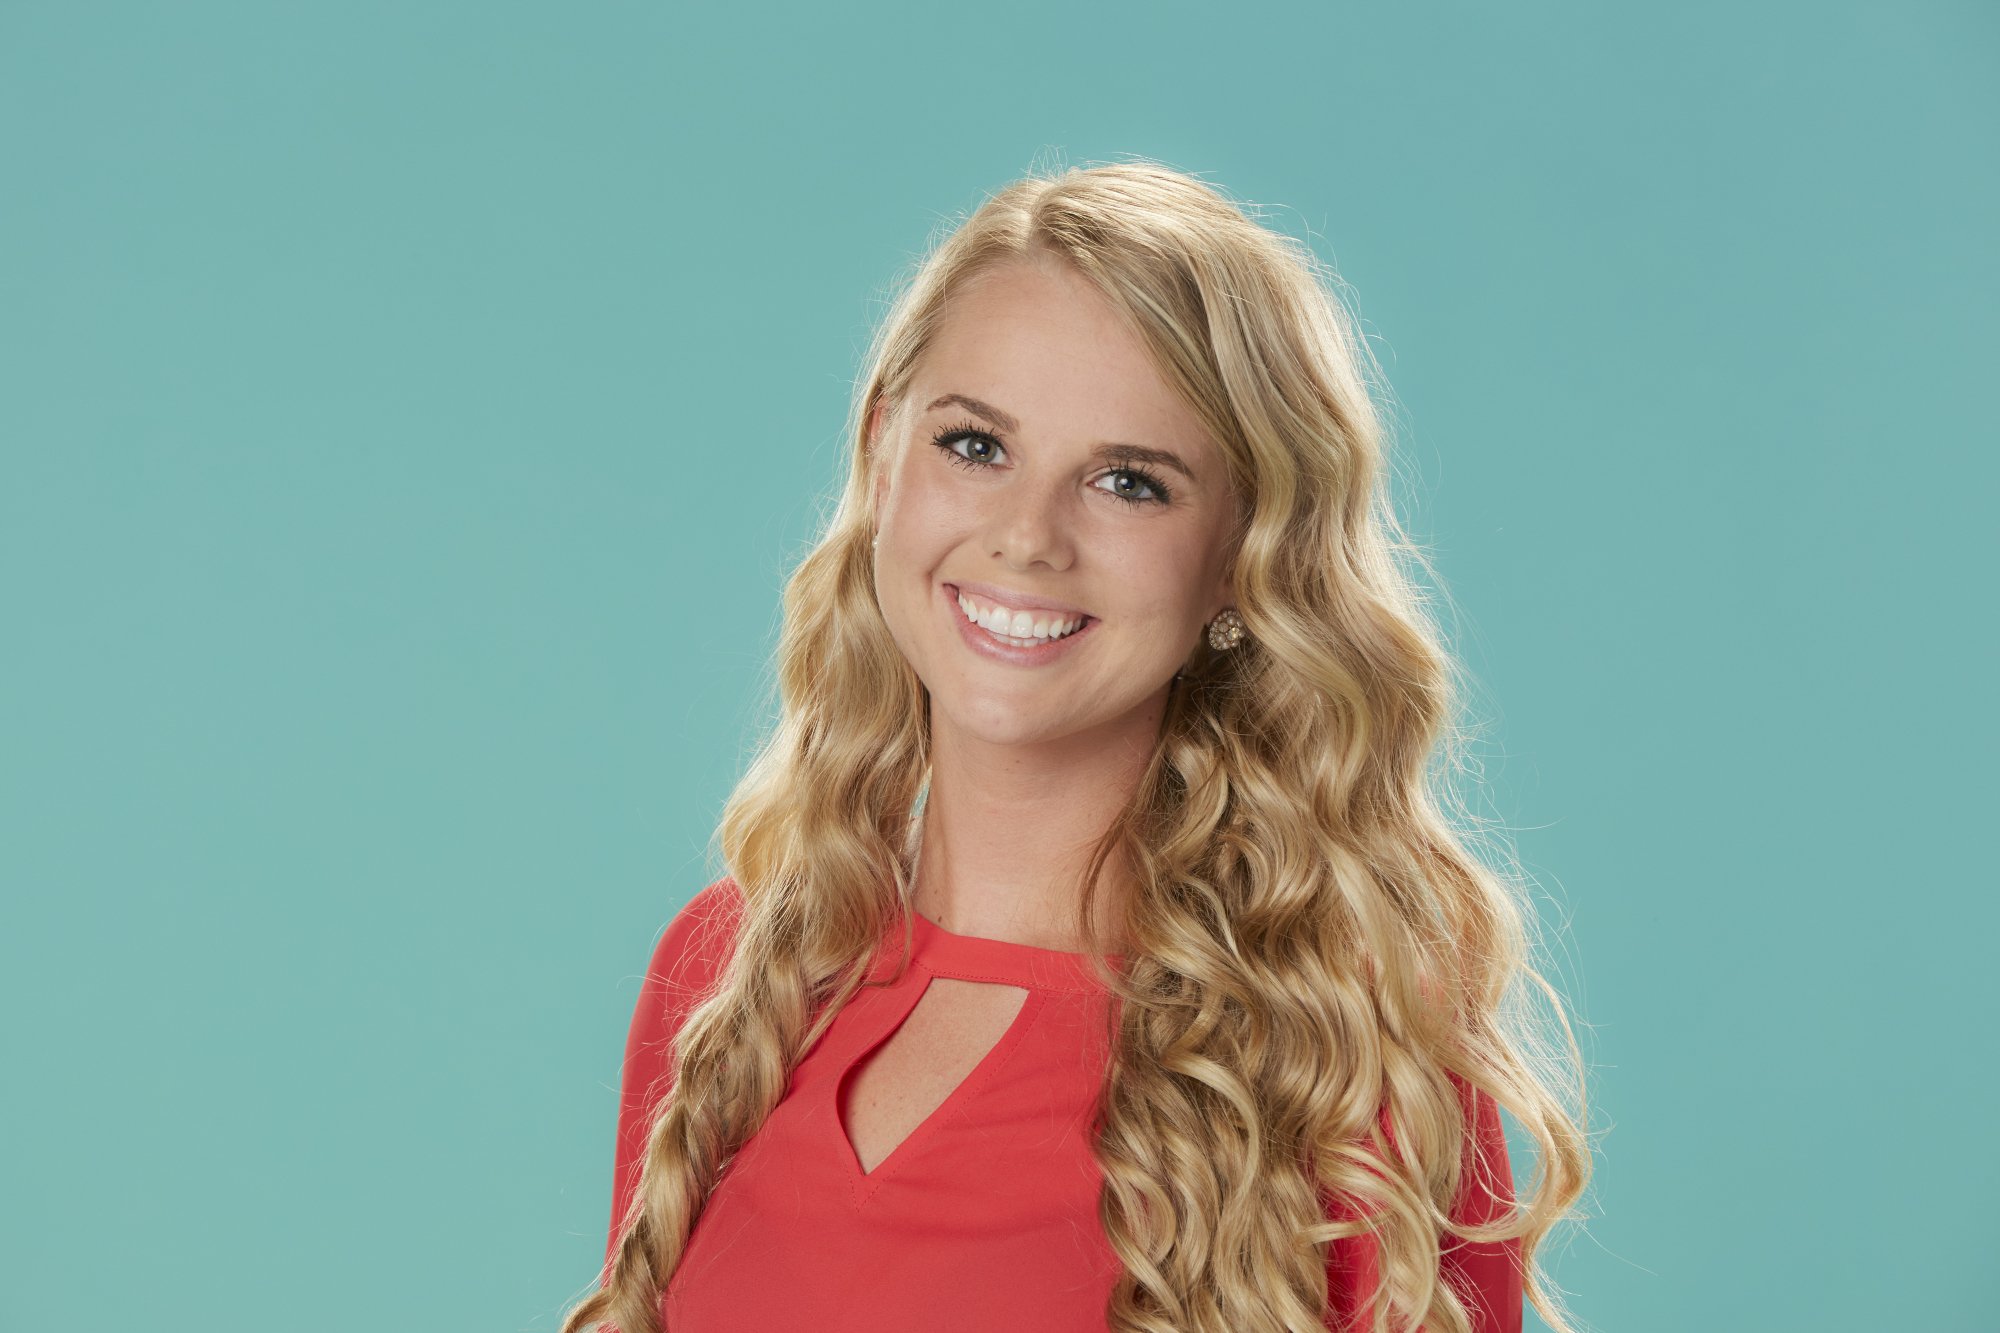 Nicole Franzel of the CBS series 'Big Brother'